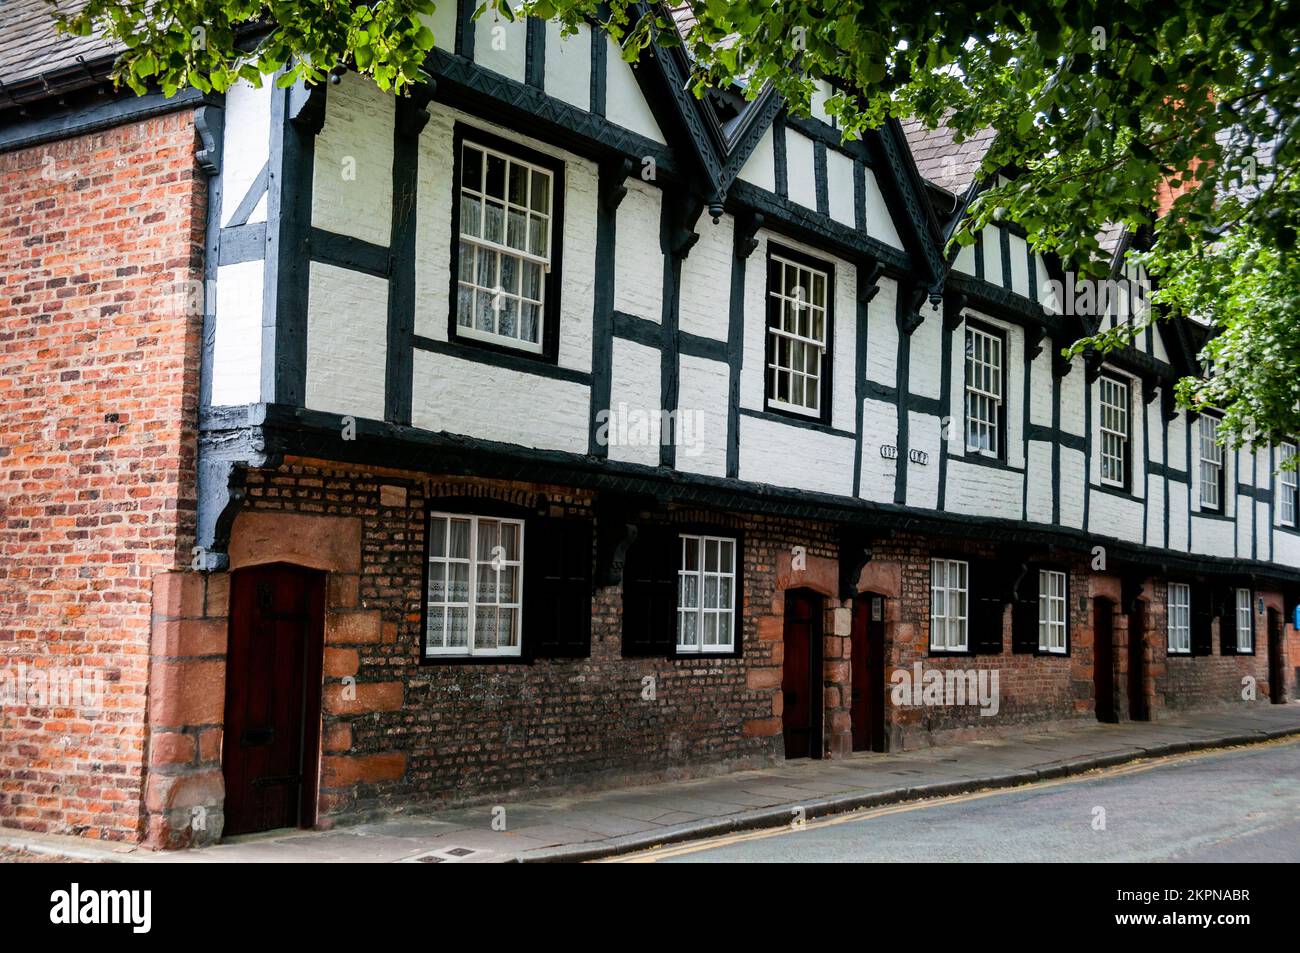 Black-and-white Revival timber frame terraced house in the English town of Chester. Stock Photo